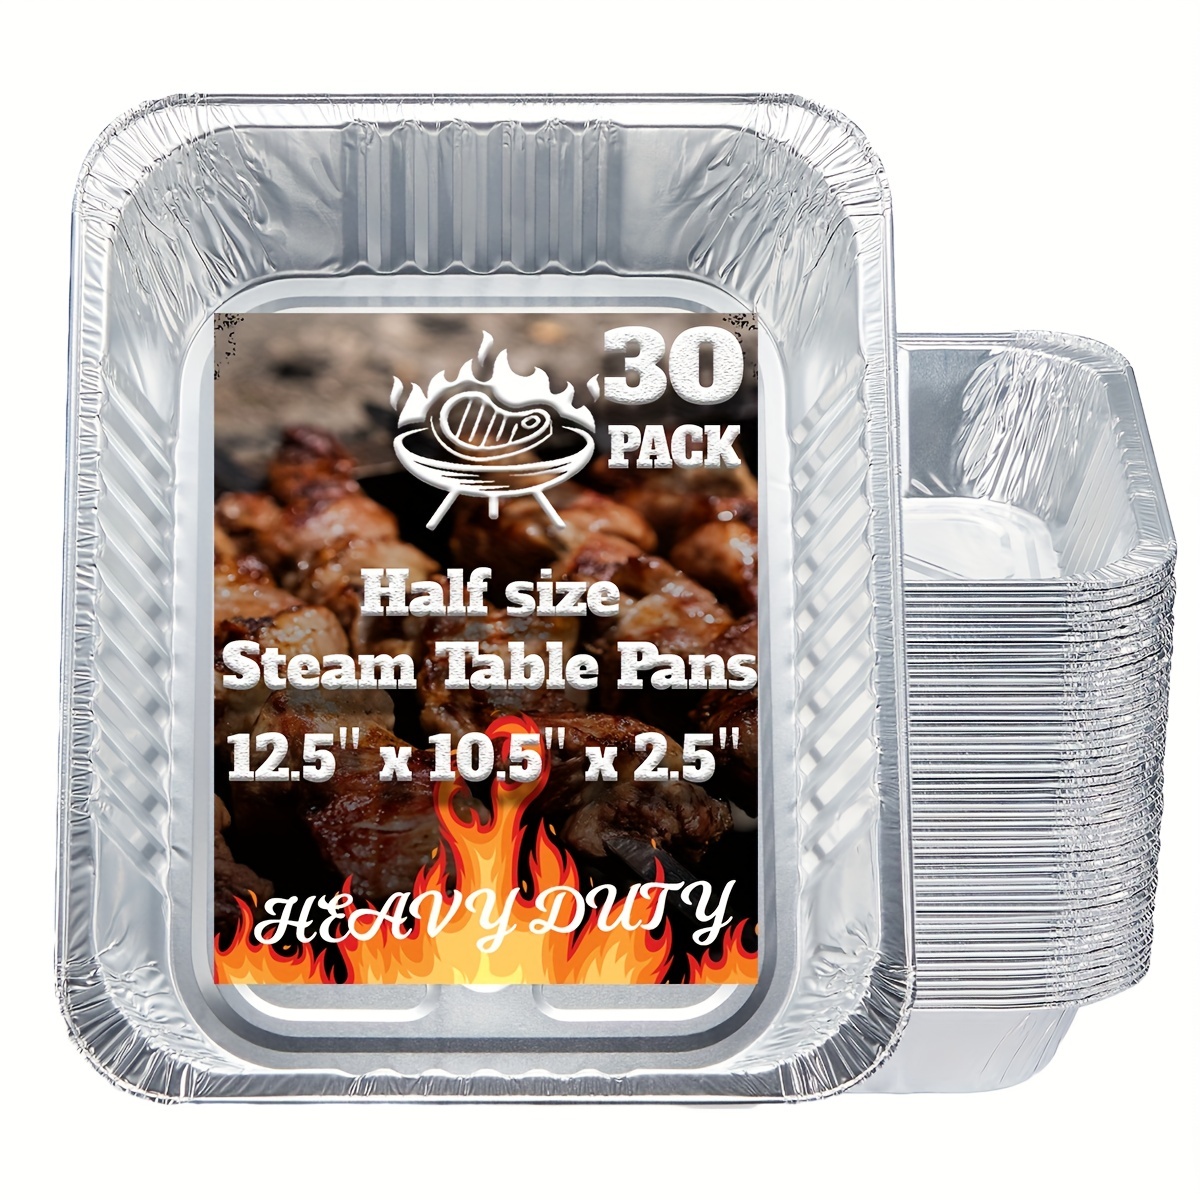 50 Pack Small Aluminum Pans with Lids, 1lb Capacity Disposable Foil Pans,  Aluminum Food Containers for Baking, Roasting, Meal Prep, 5.5 x 4.5 Inch  Thick and Sturdy 